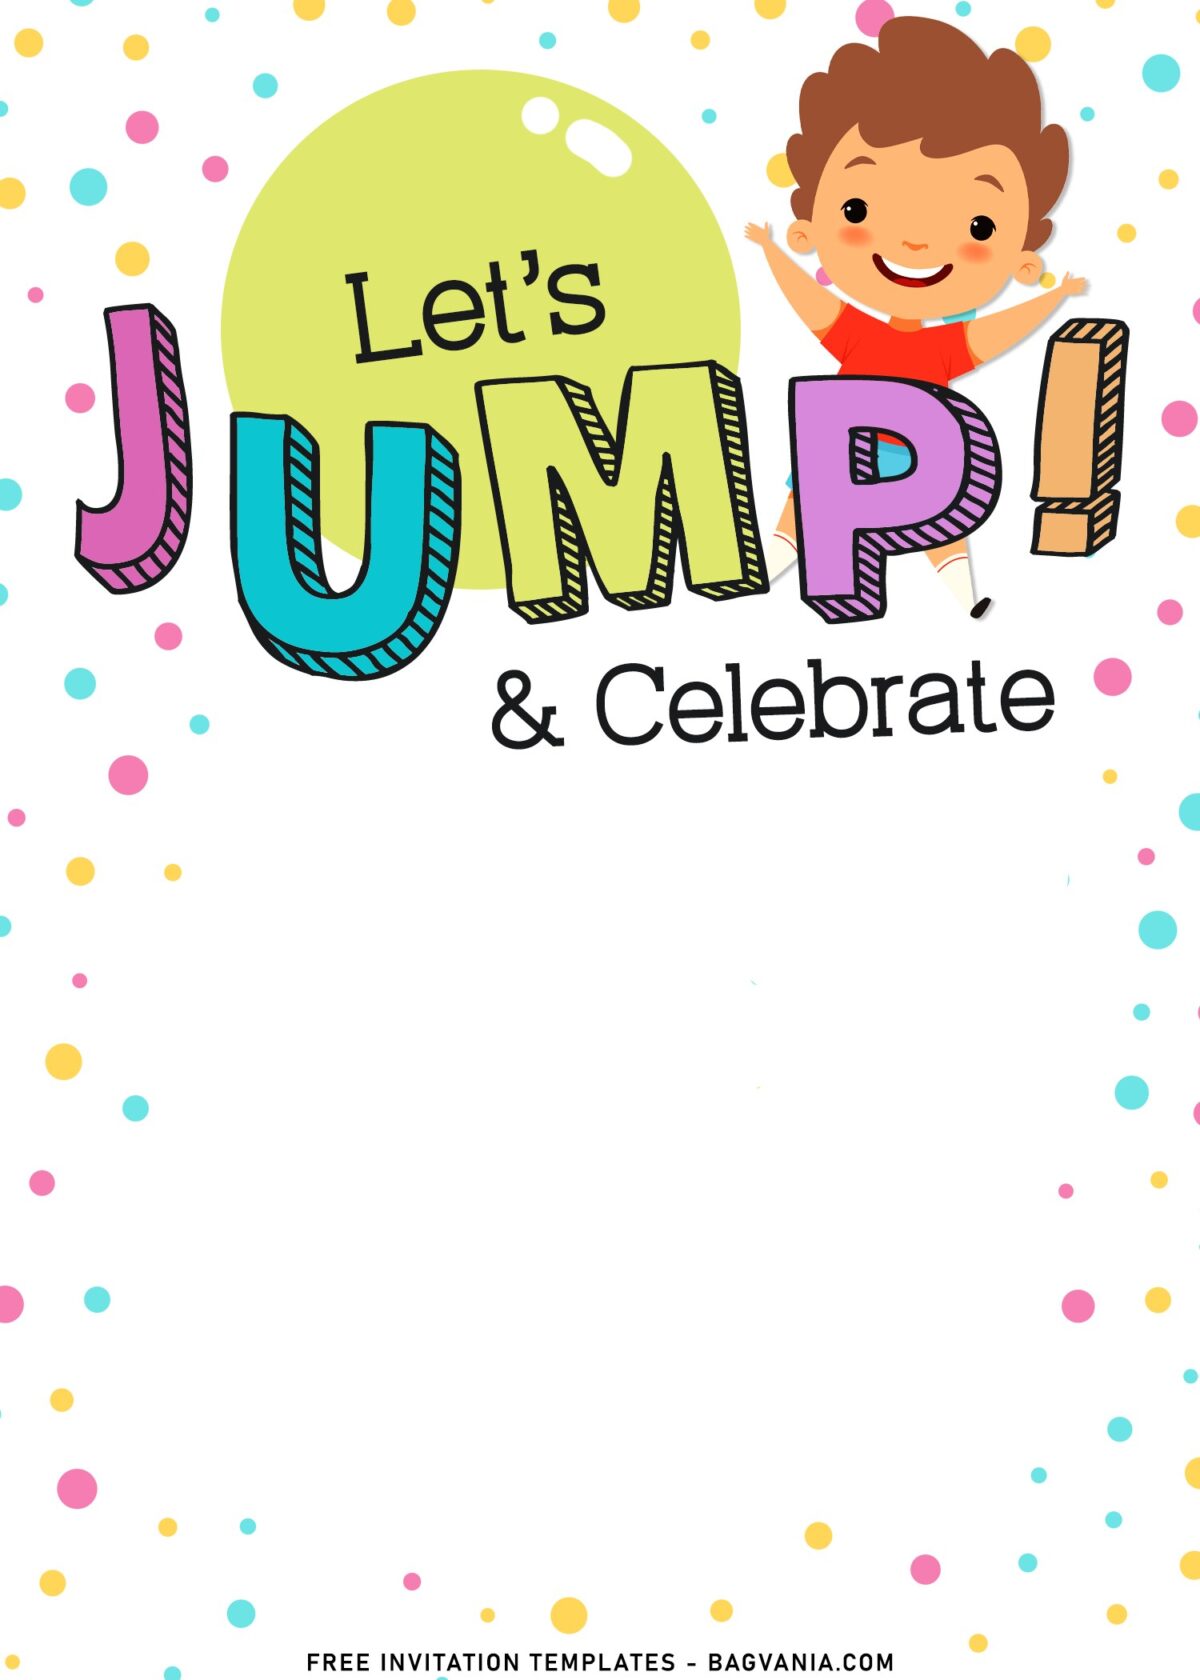 11+ Let’s Jump Party Invitation Templates For Your Kids Next Bash with chalkboard wording